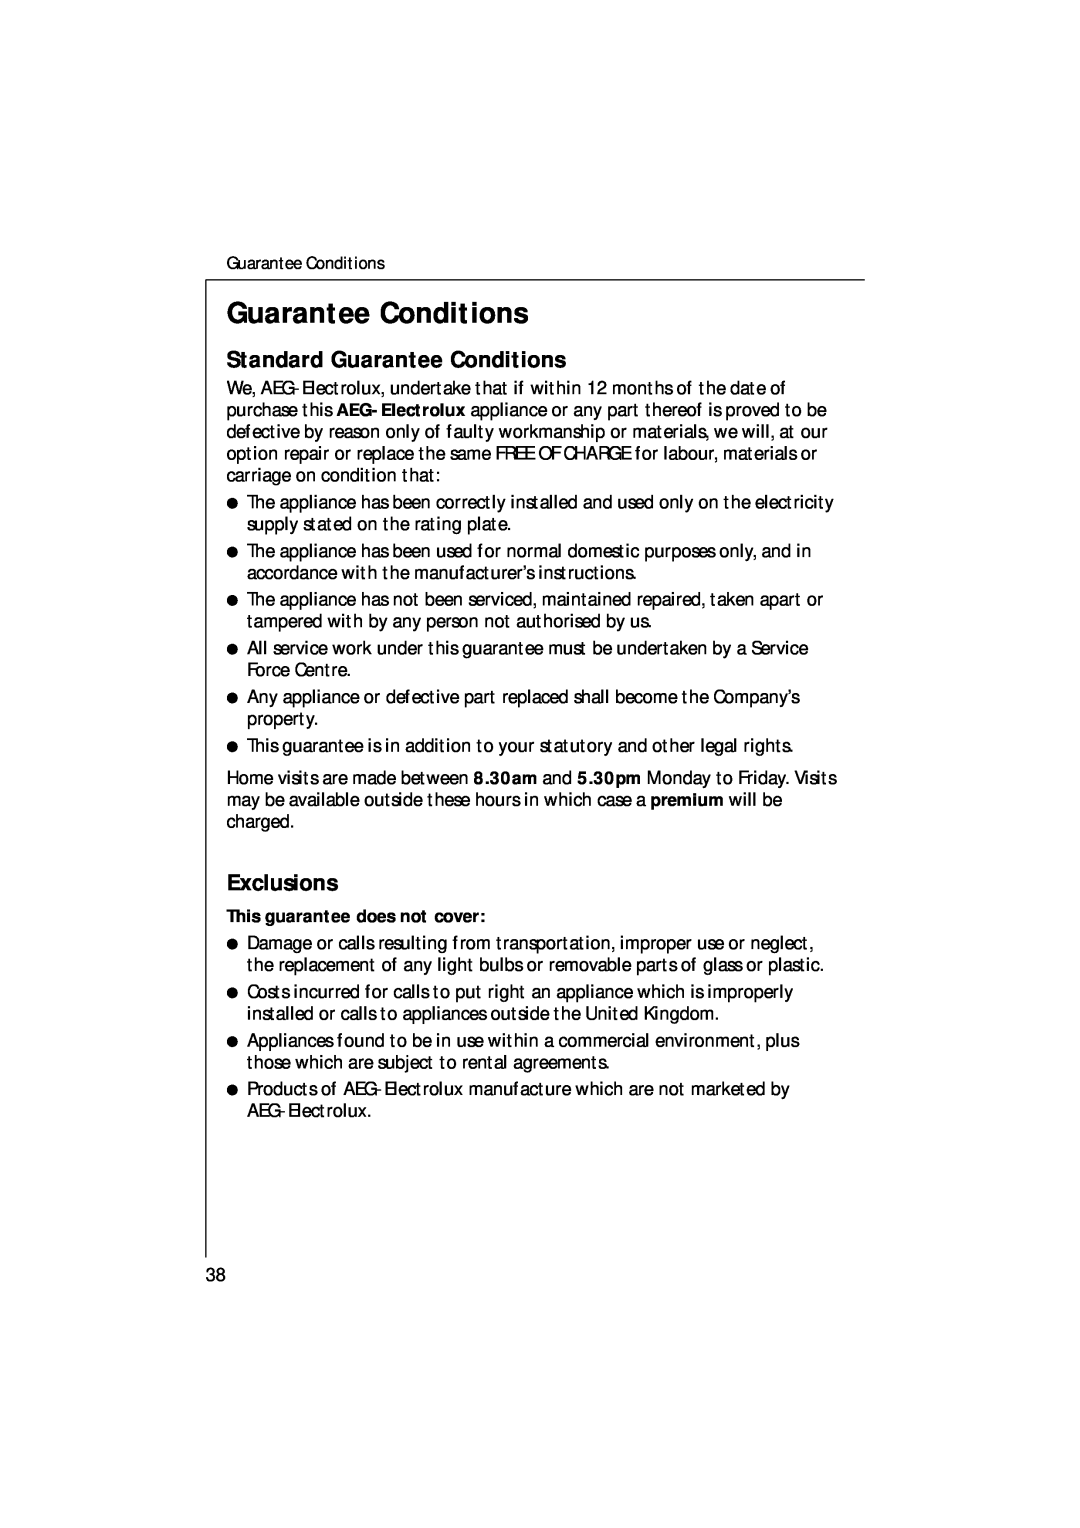 Electrolux U30205 manual Standard Guarantee Conditions, Exclusions 